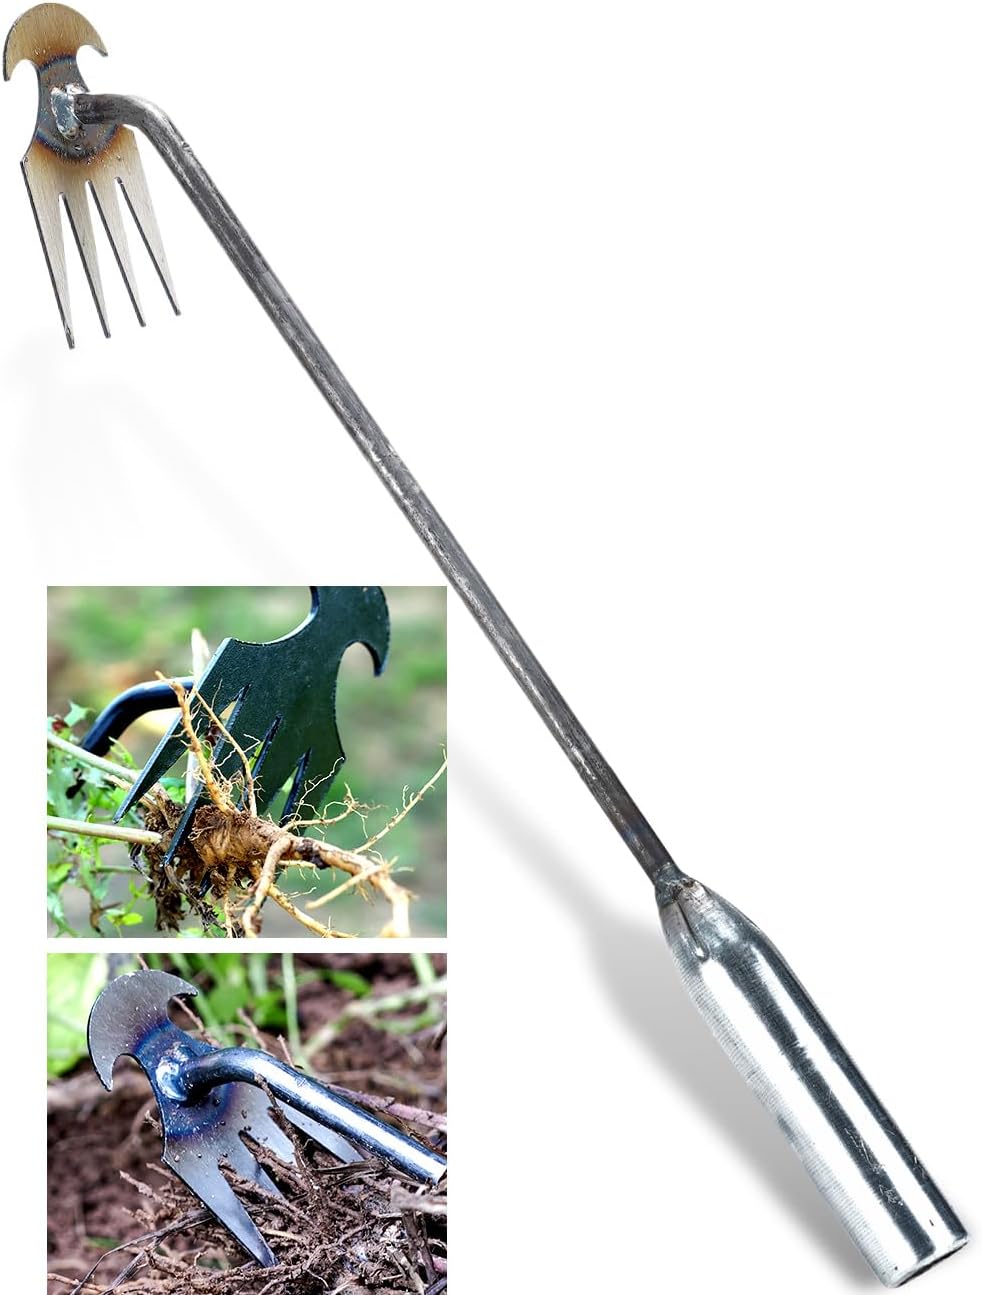 Gardens Weed Puller Manual Household Agricultural Tool Remover Weeding Loosening,Weeding Artifact Uprooting Weeding Tool for Garden Weed Removal Tool with Handle - image 3 of 6